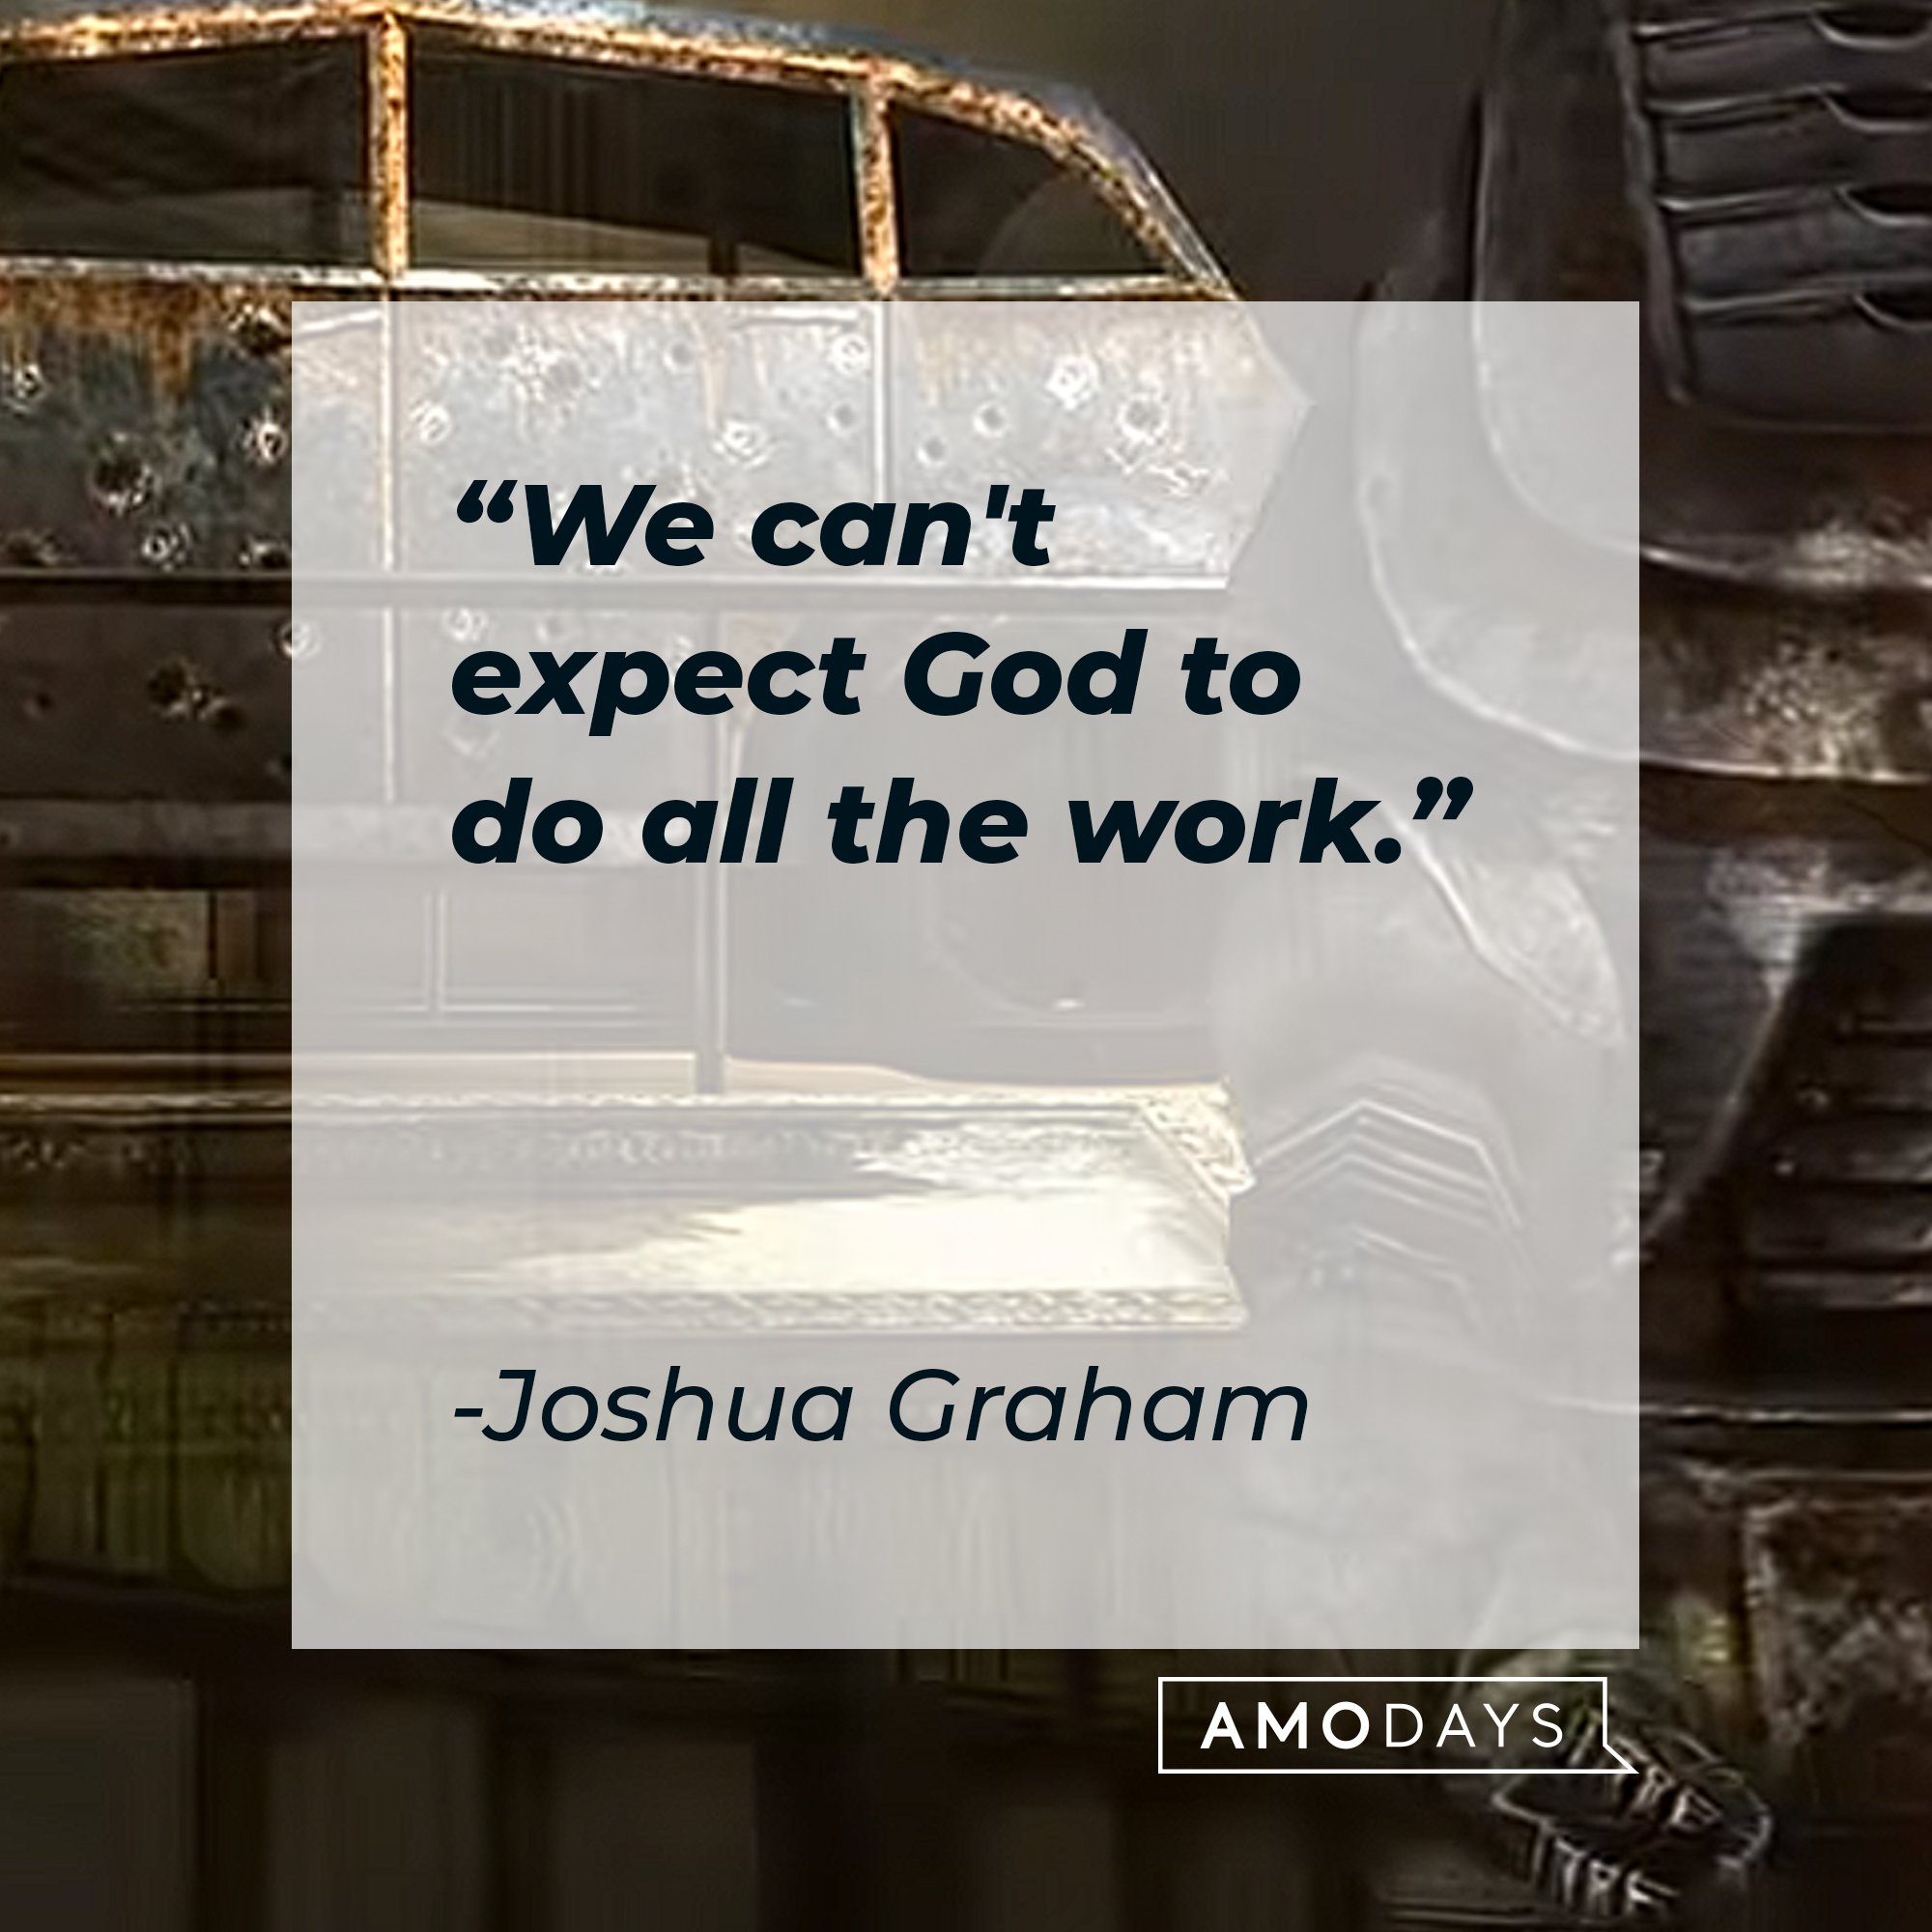 Joshua Graham‘s quote: "We can't expect God to do all the work." | Image: AmoDays